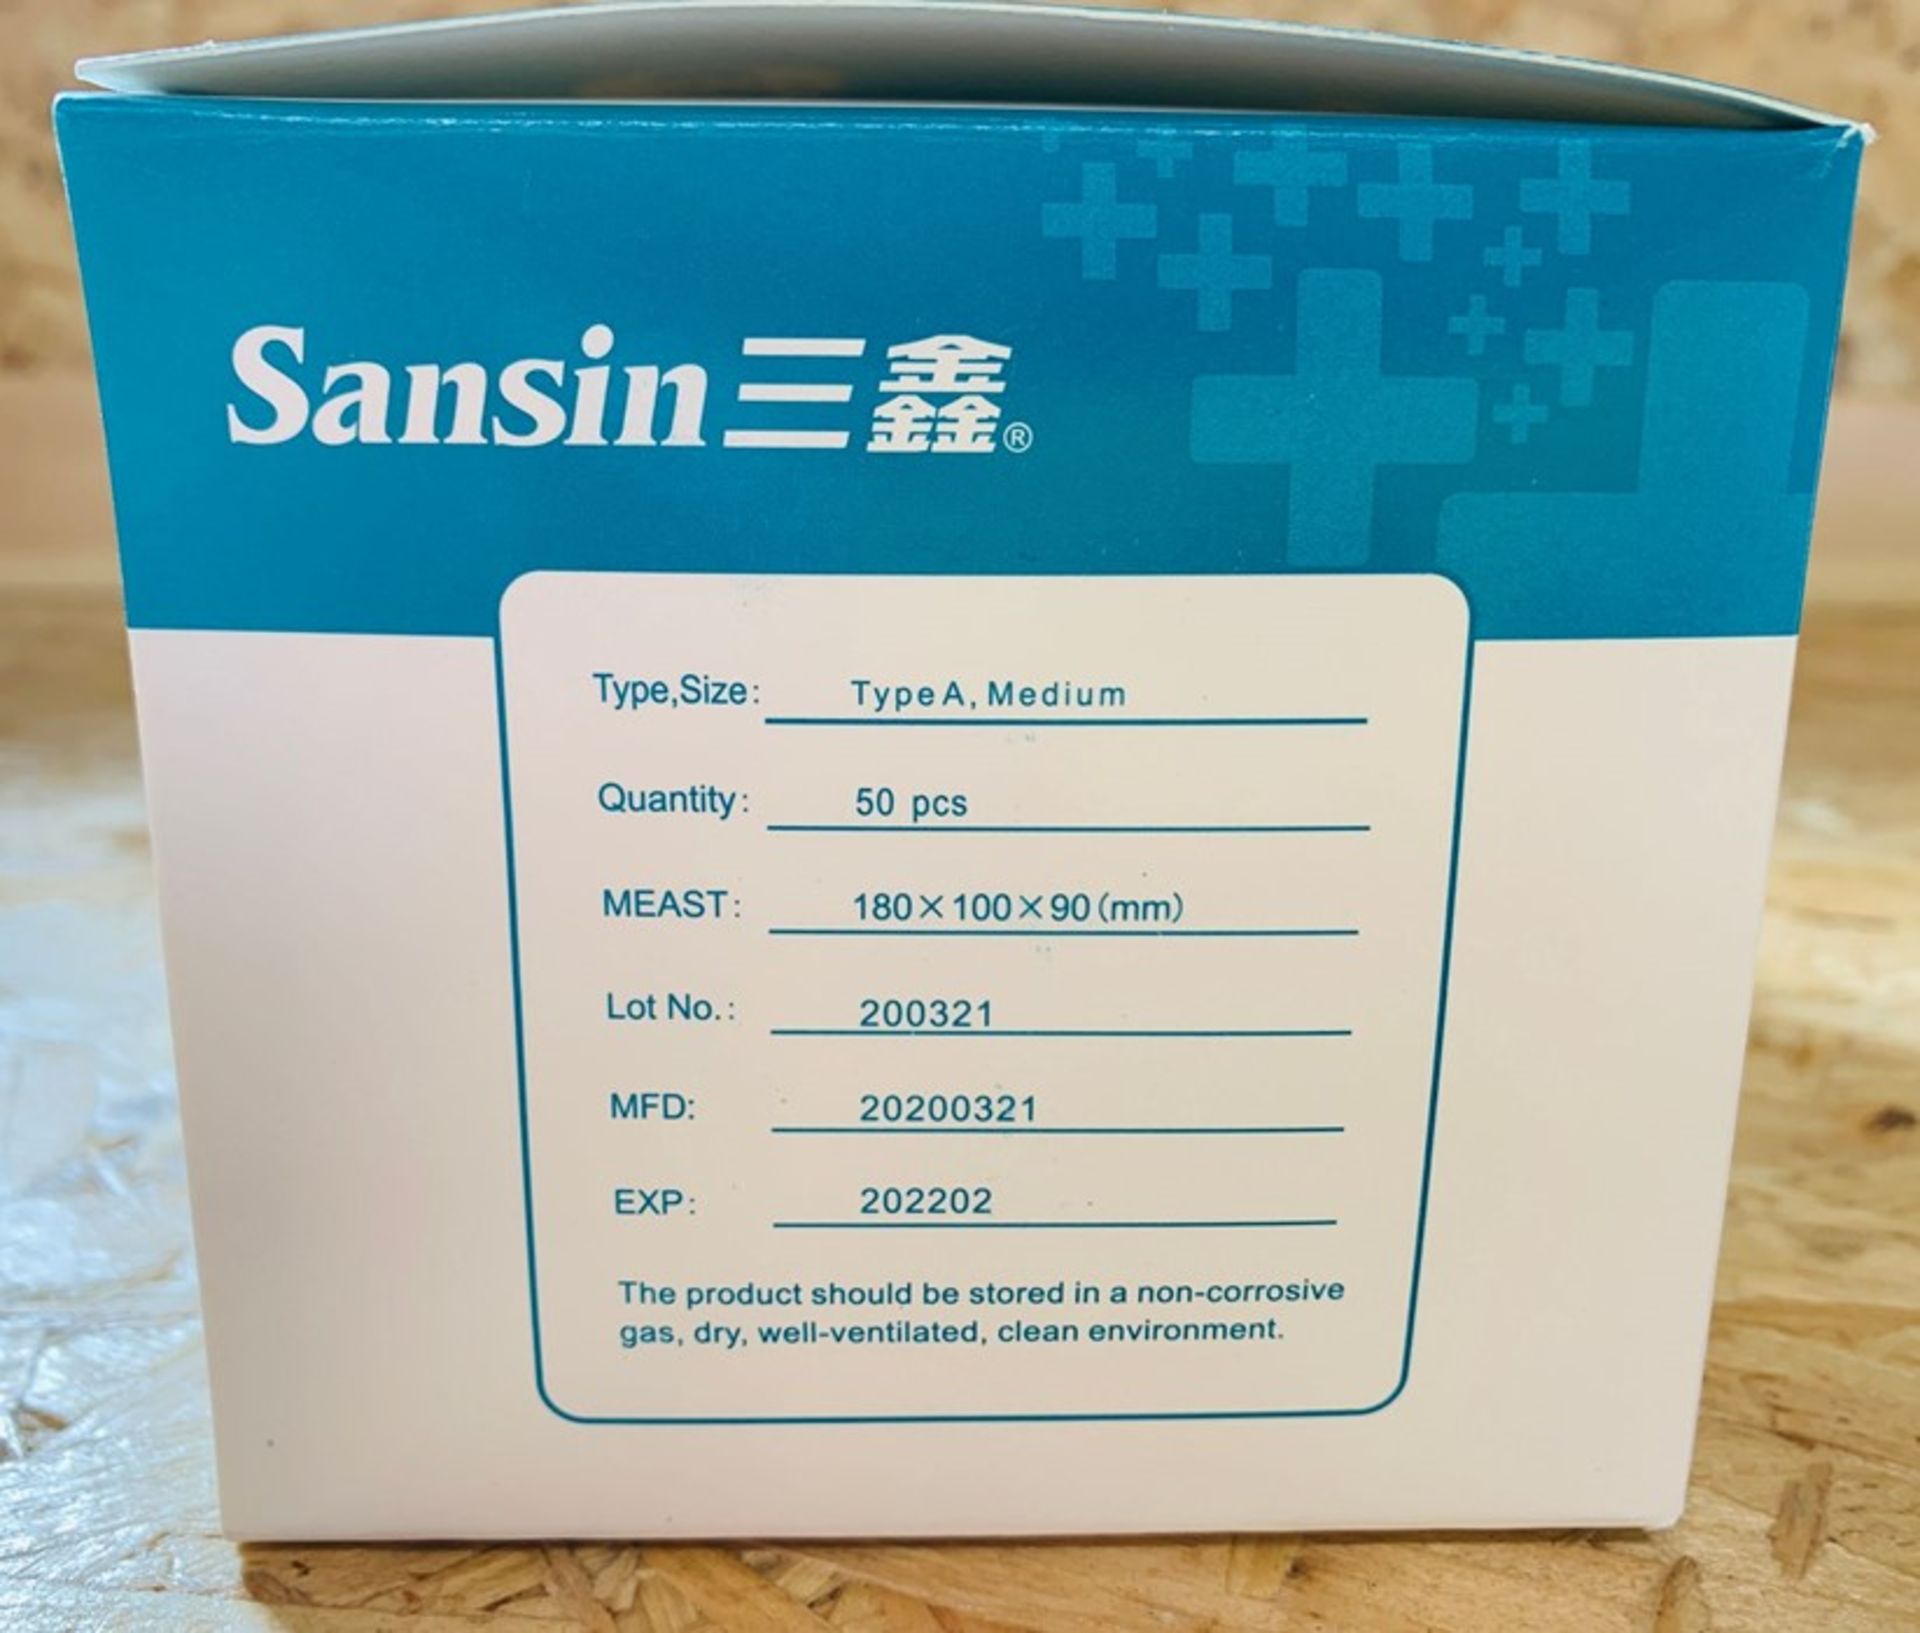 1 BOX OF SANSIN DISPOSABLE MEDICAL FACE MASKS - AS NEW - TYPE A, MEDIUM - 50 PIECES - 180 x 100 x - Image 3 of 4